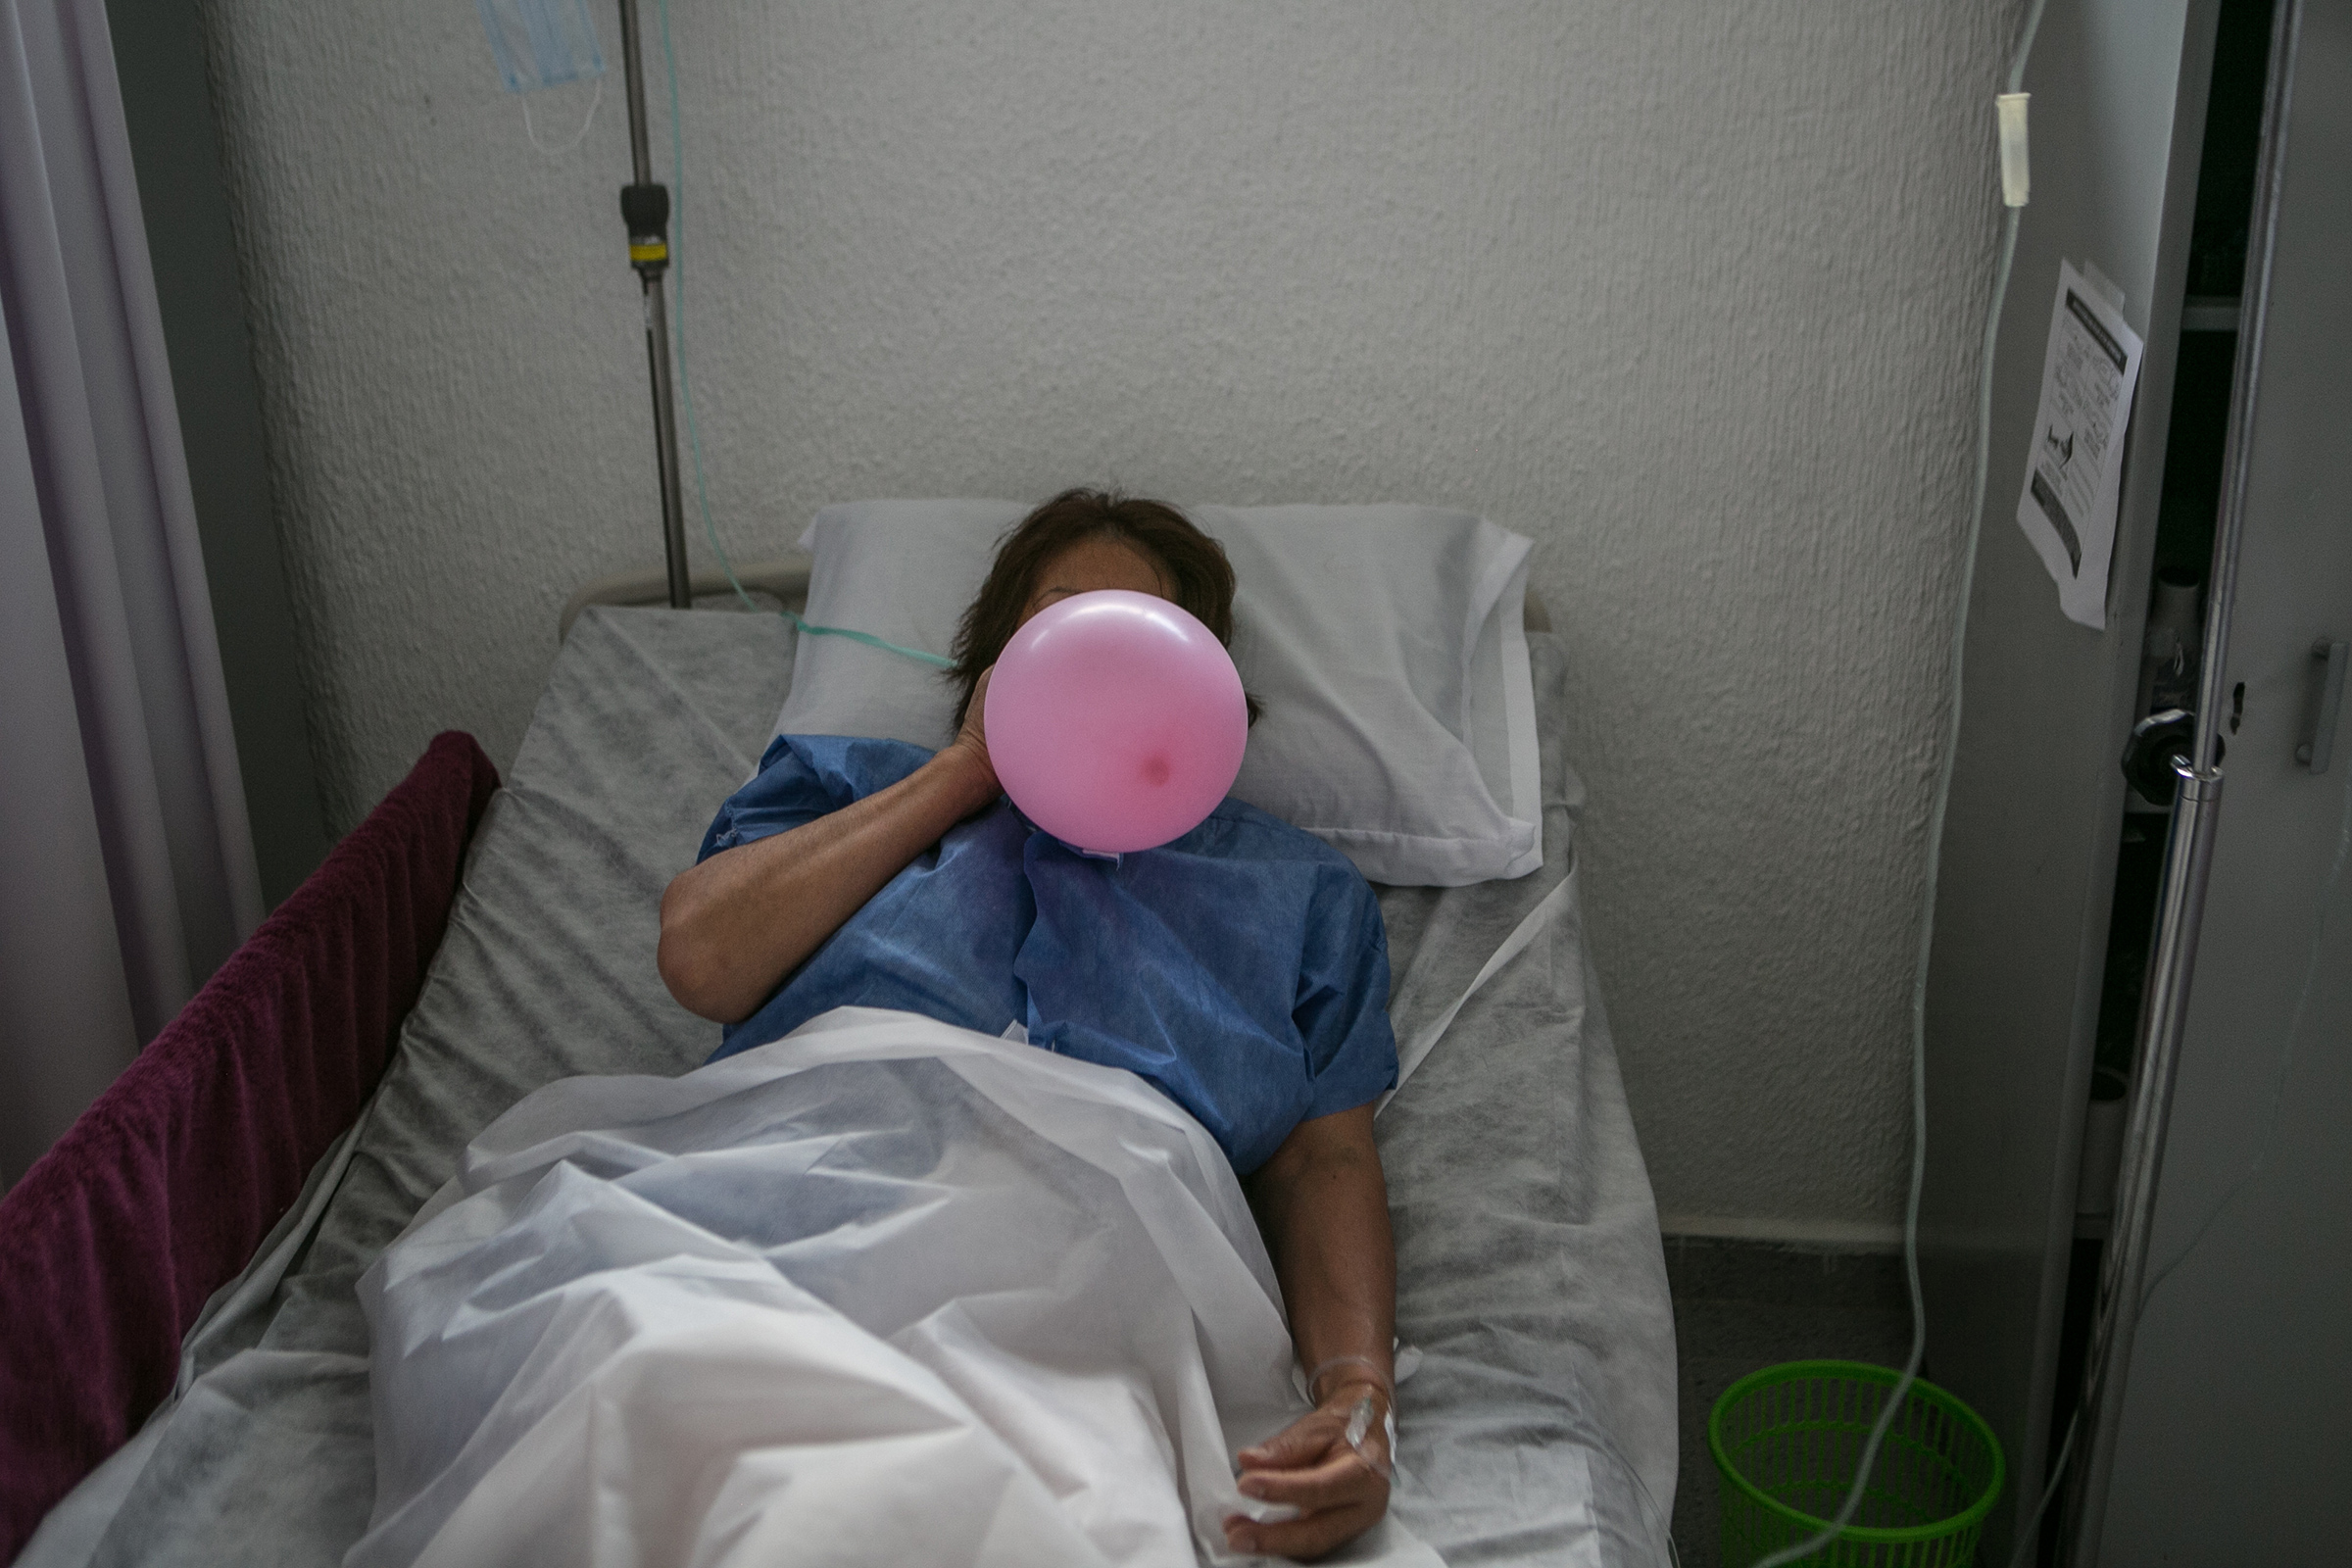 A coronavirus patient uses a balloon to strengthen her lungs as she recovers at a makeshift hospital in Mexico City on June 30. (Meghan Dhaliwal—The New York Times/Redux)